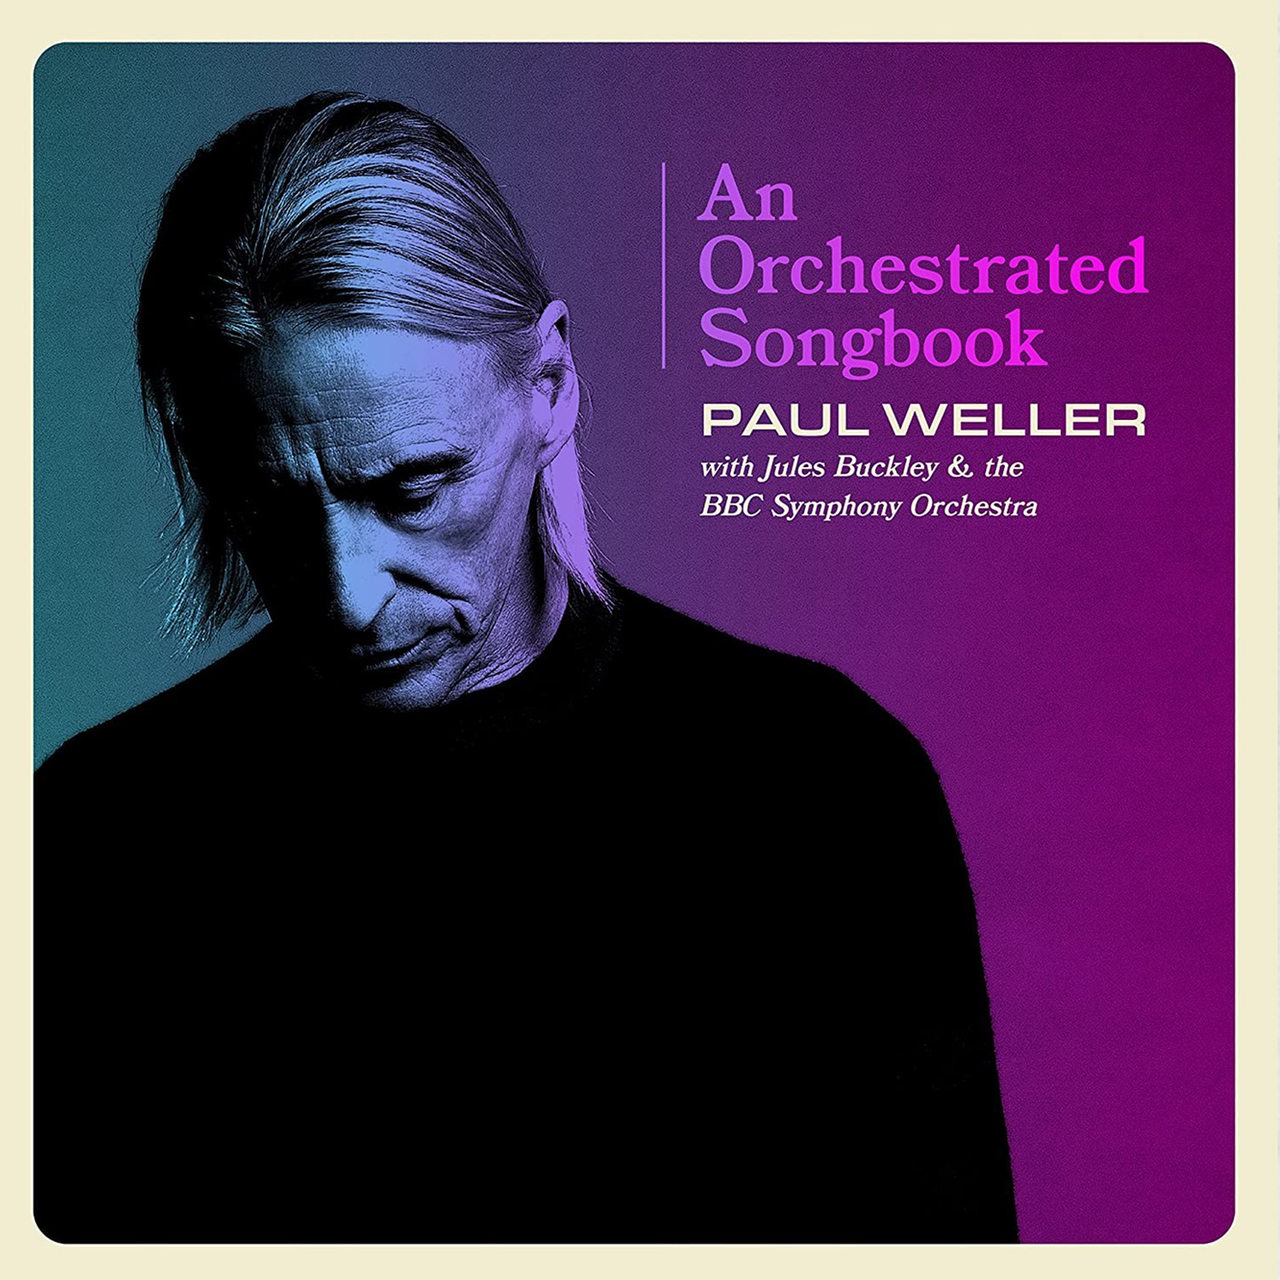 Album-Cover von Paul Weller "An Orchestrated Songbook (Live)"